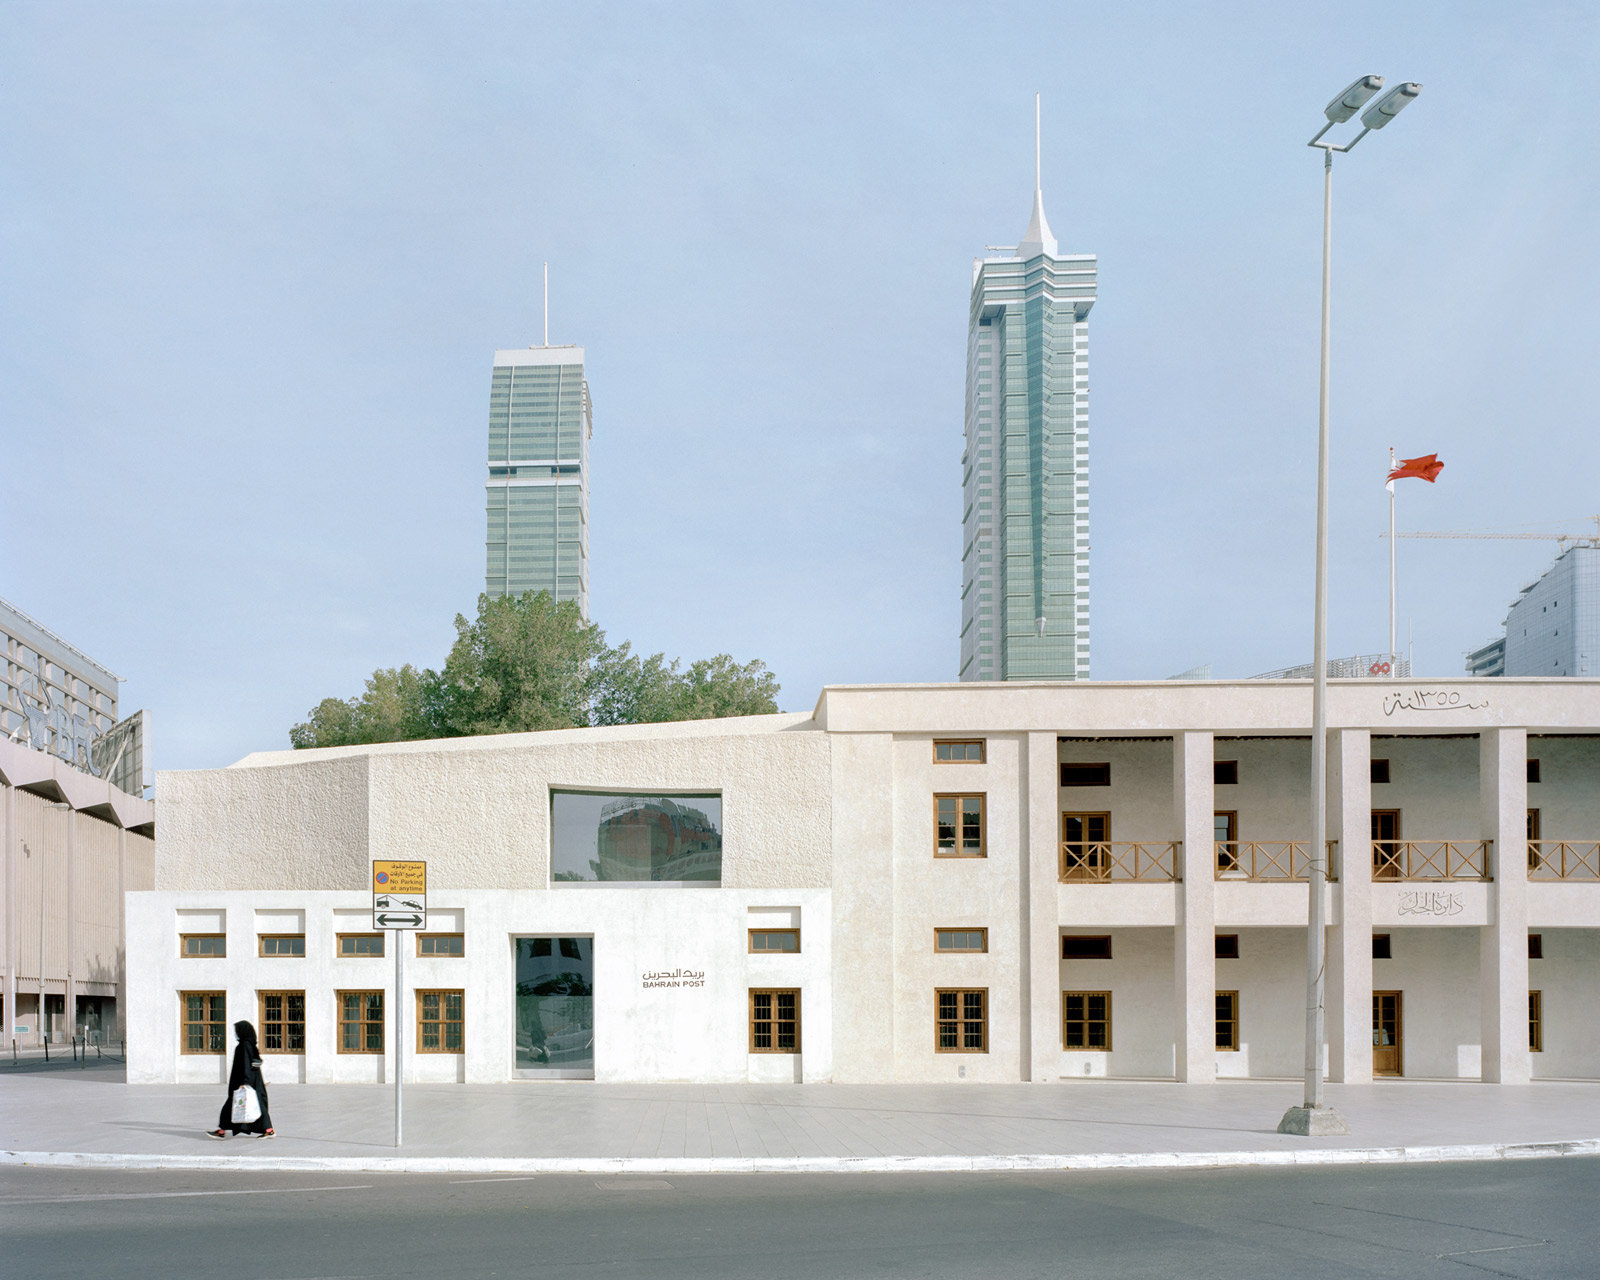 Image of 20220802 AnneHoltrop Manama 2 in Manama post office - Cosentino